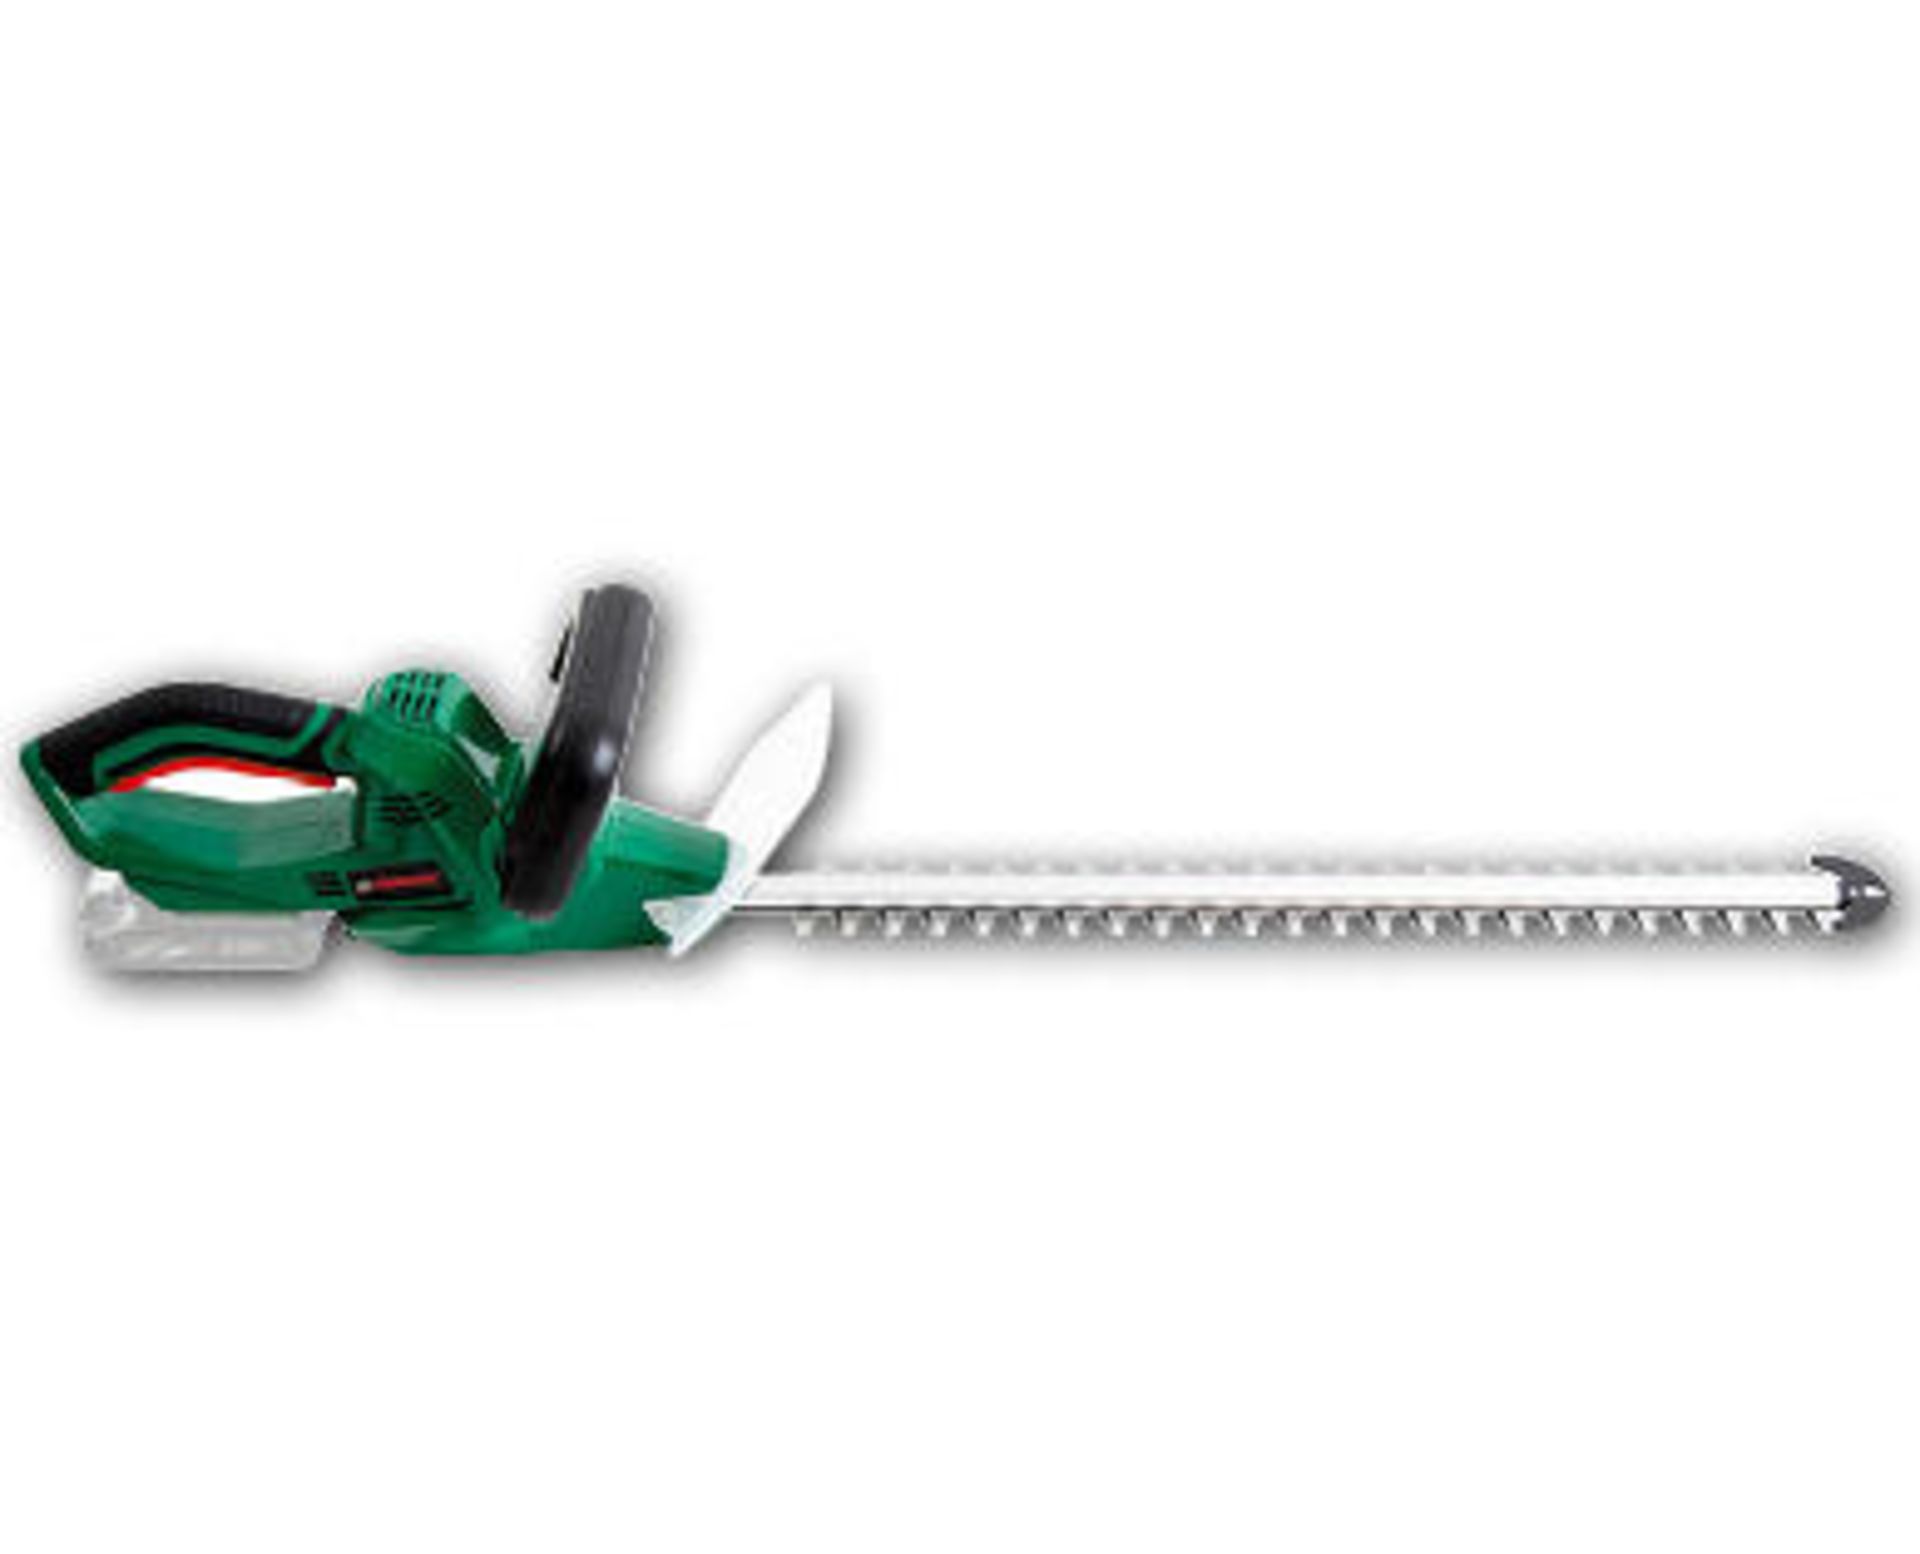 Boxed Ferrex 20V Lithium Iron Cordless Hedge Trimmers RRP £55 Each (Public Viewing and Appraisals